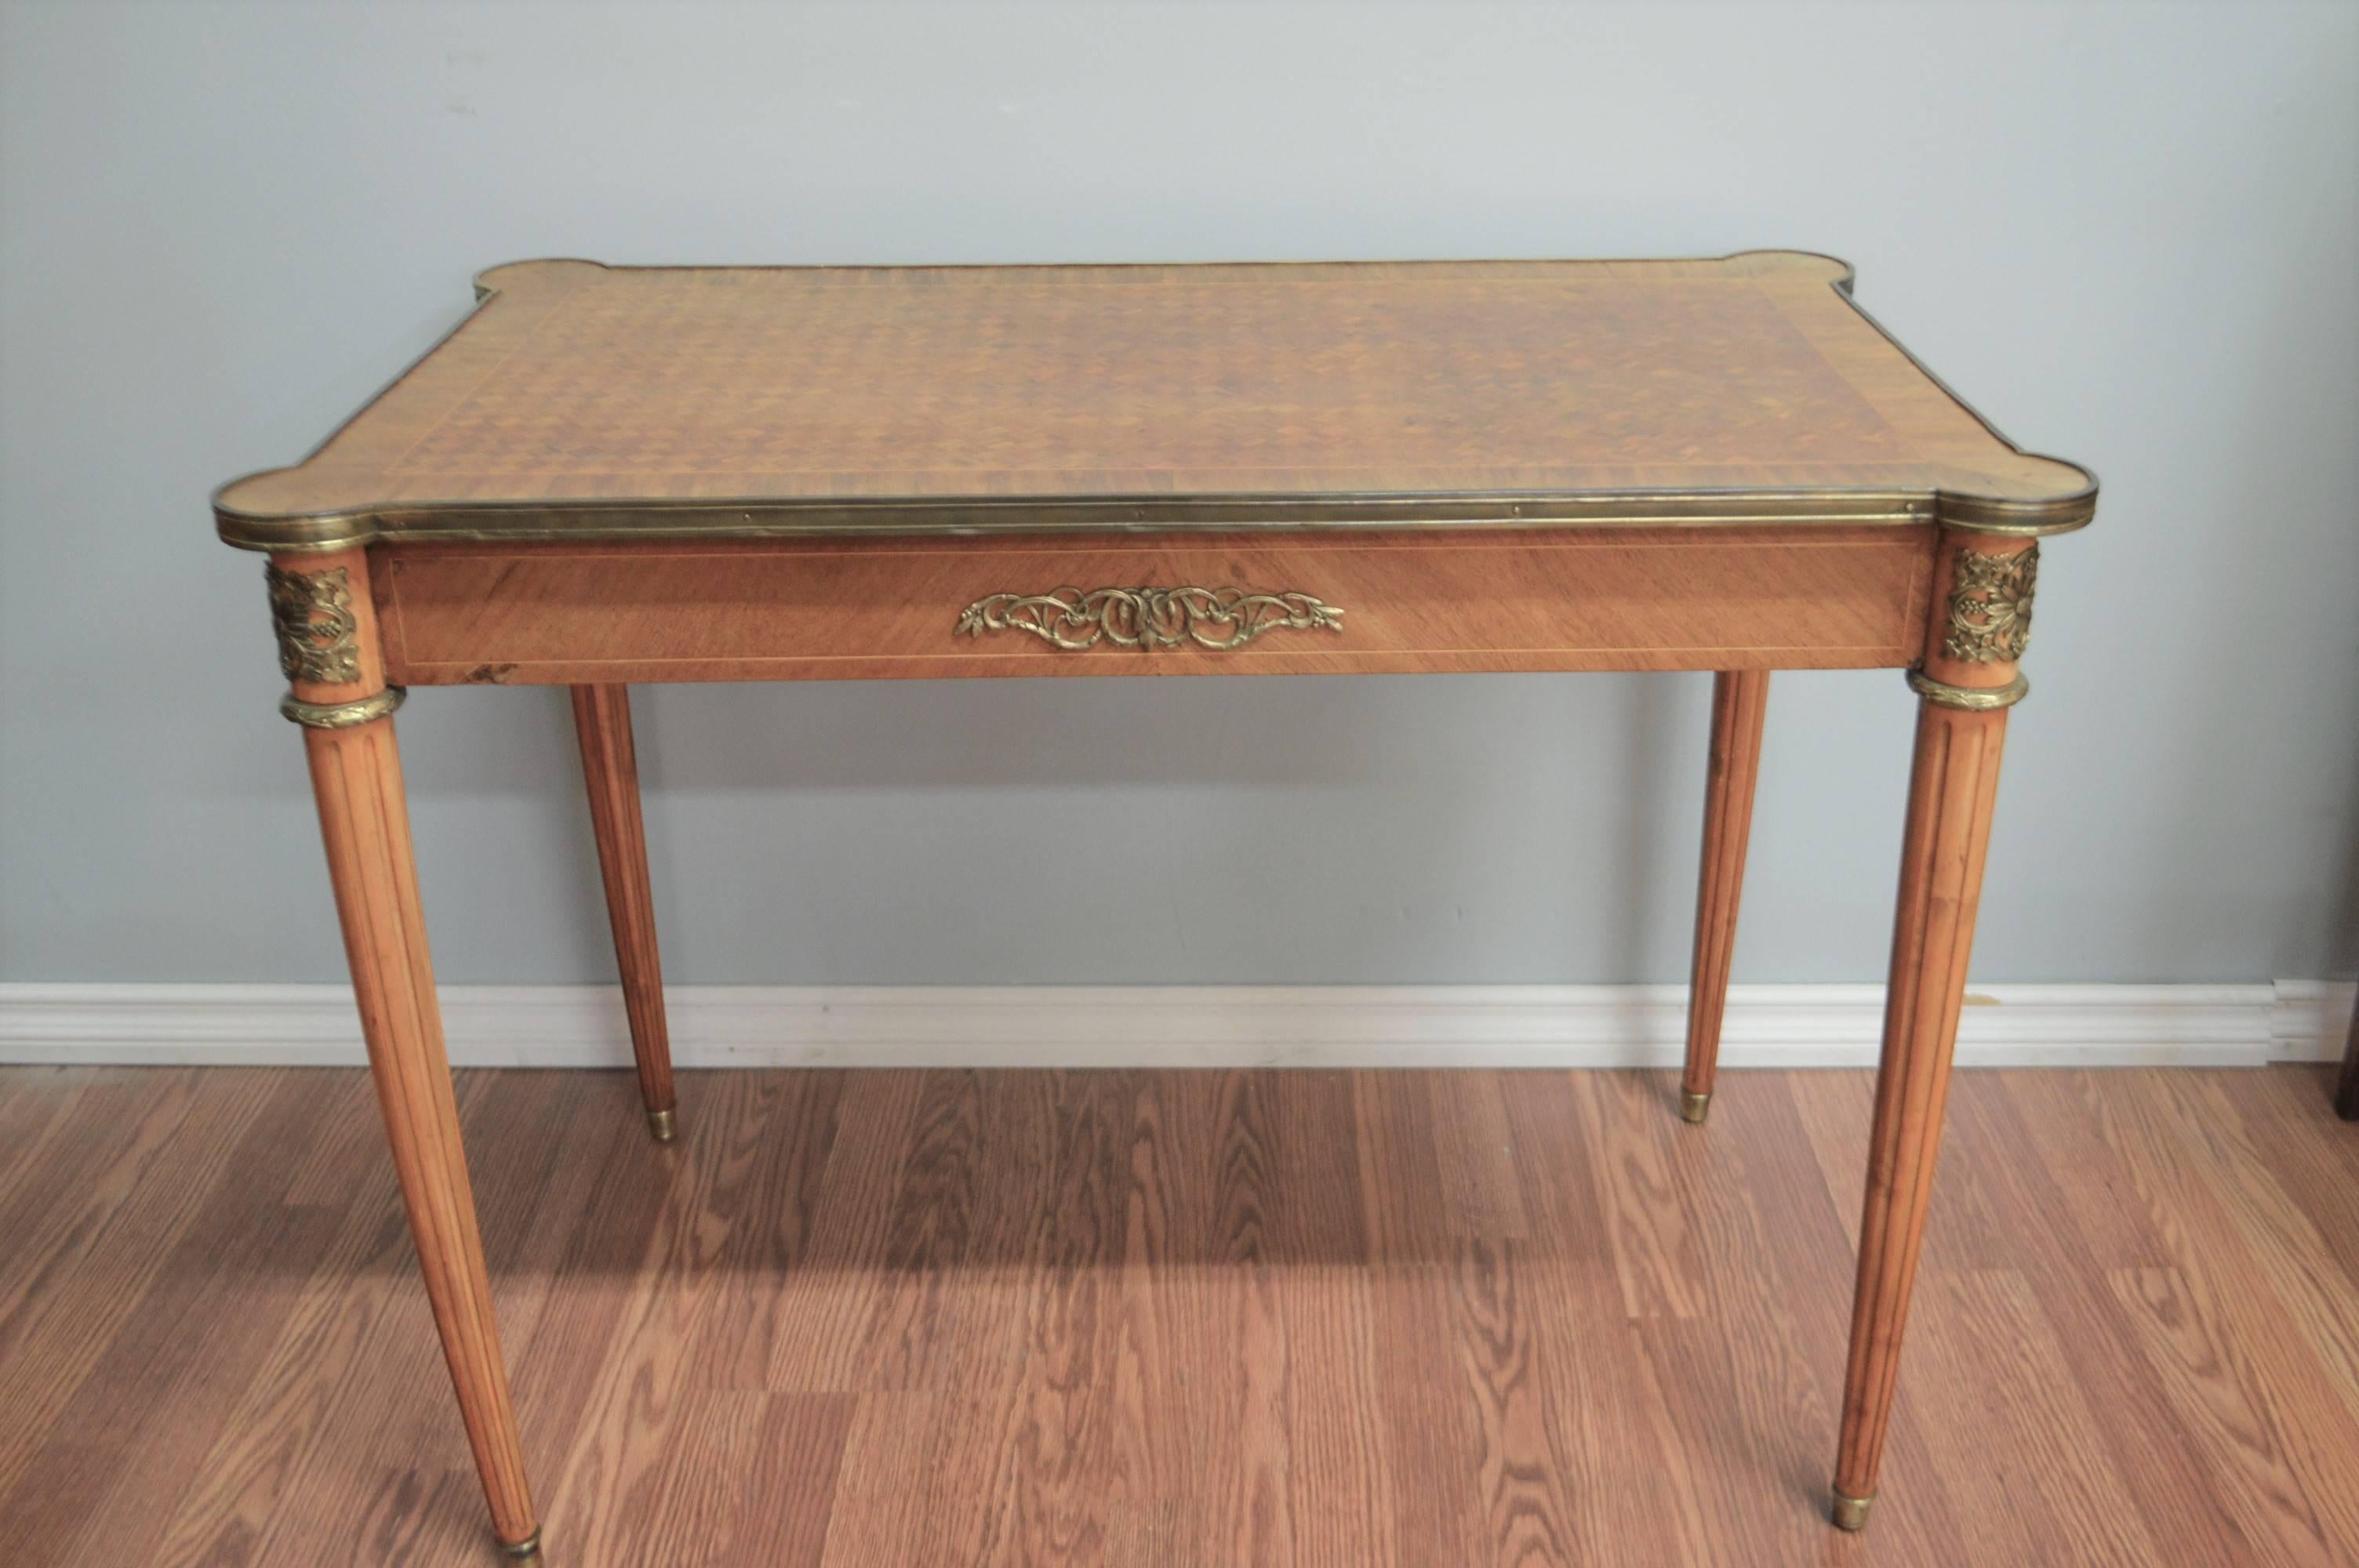 20th Century Louis XVI Style Writing Table with Diamond In-Lay Top, Bronze Ornaments, Drawer